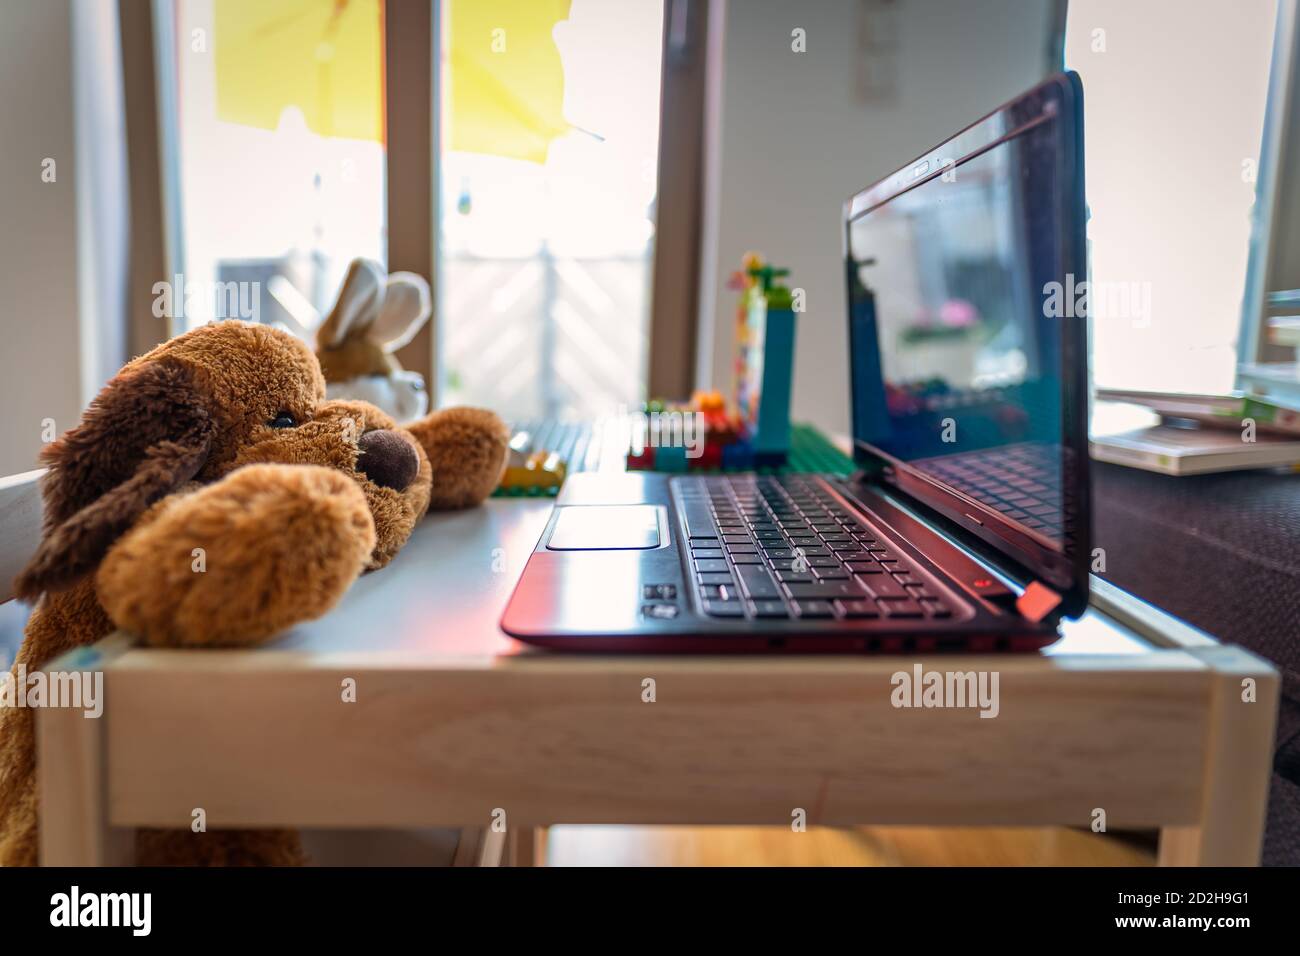 Funny homeoffice scenery with a stuffed teddy and his friend a rabbit working at a laptop. Stock Photo